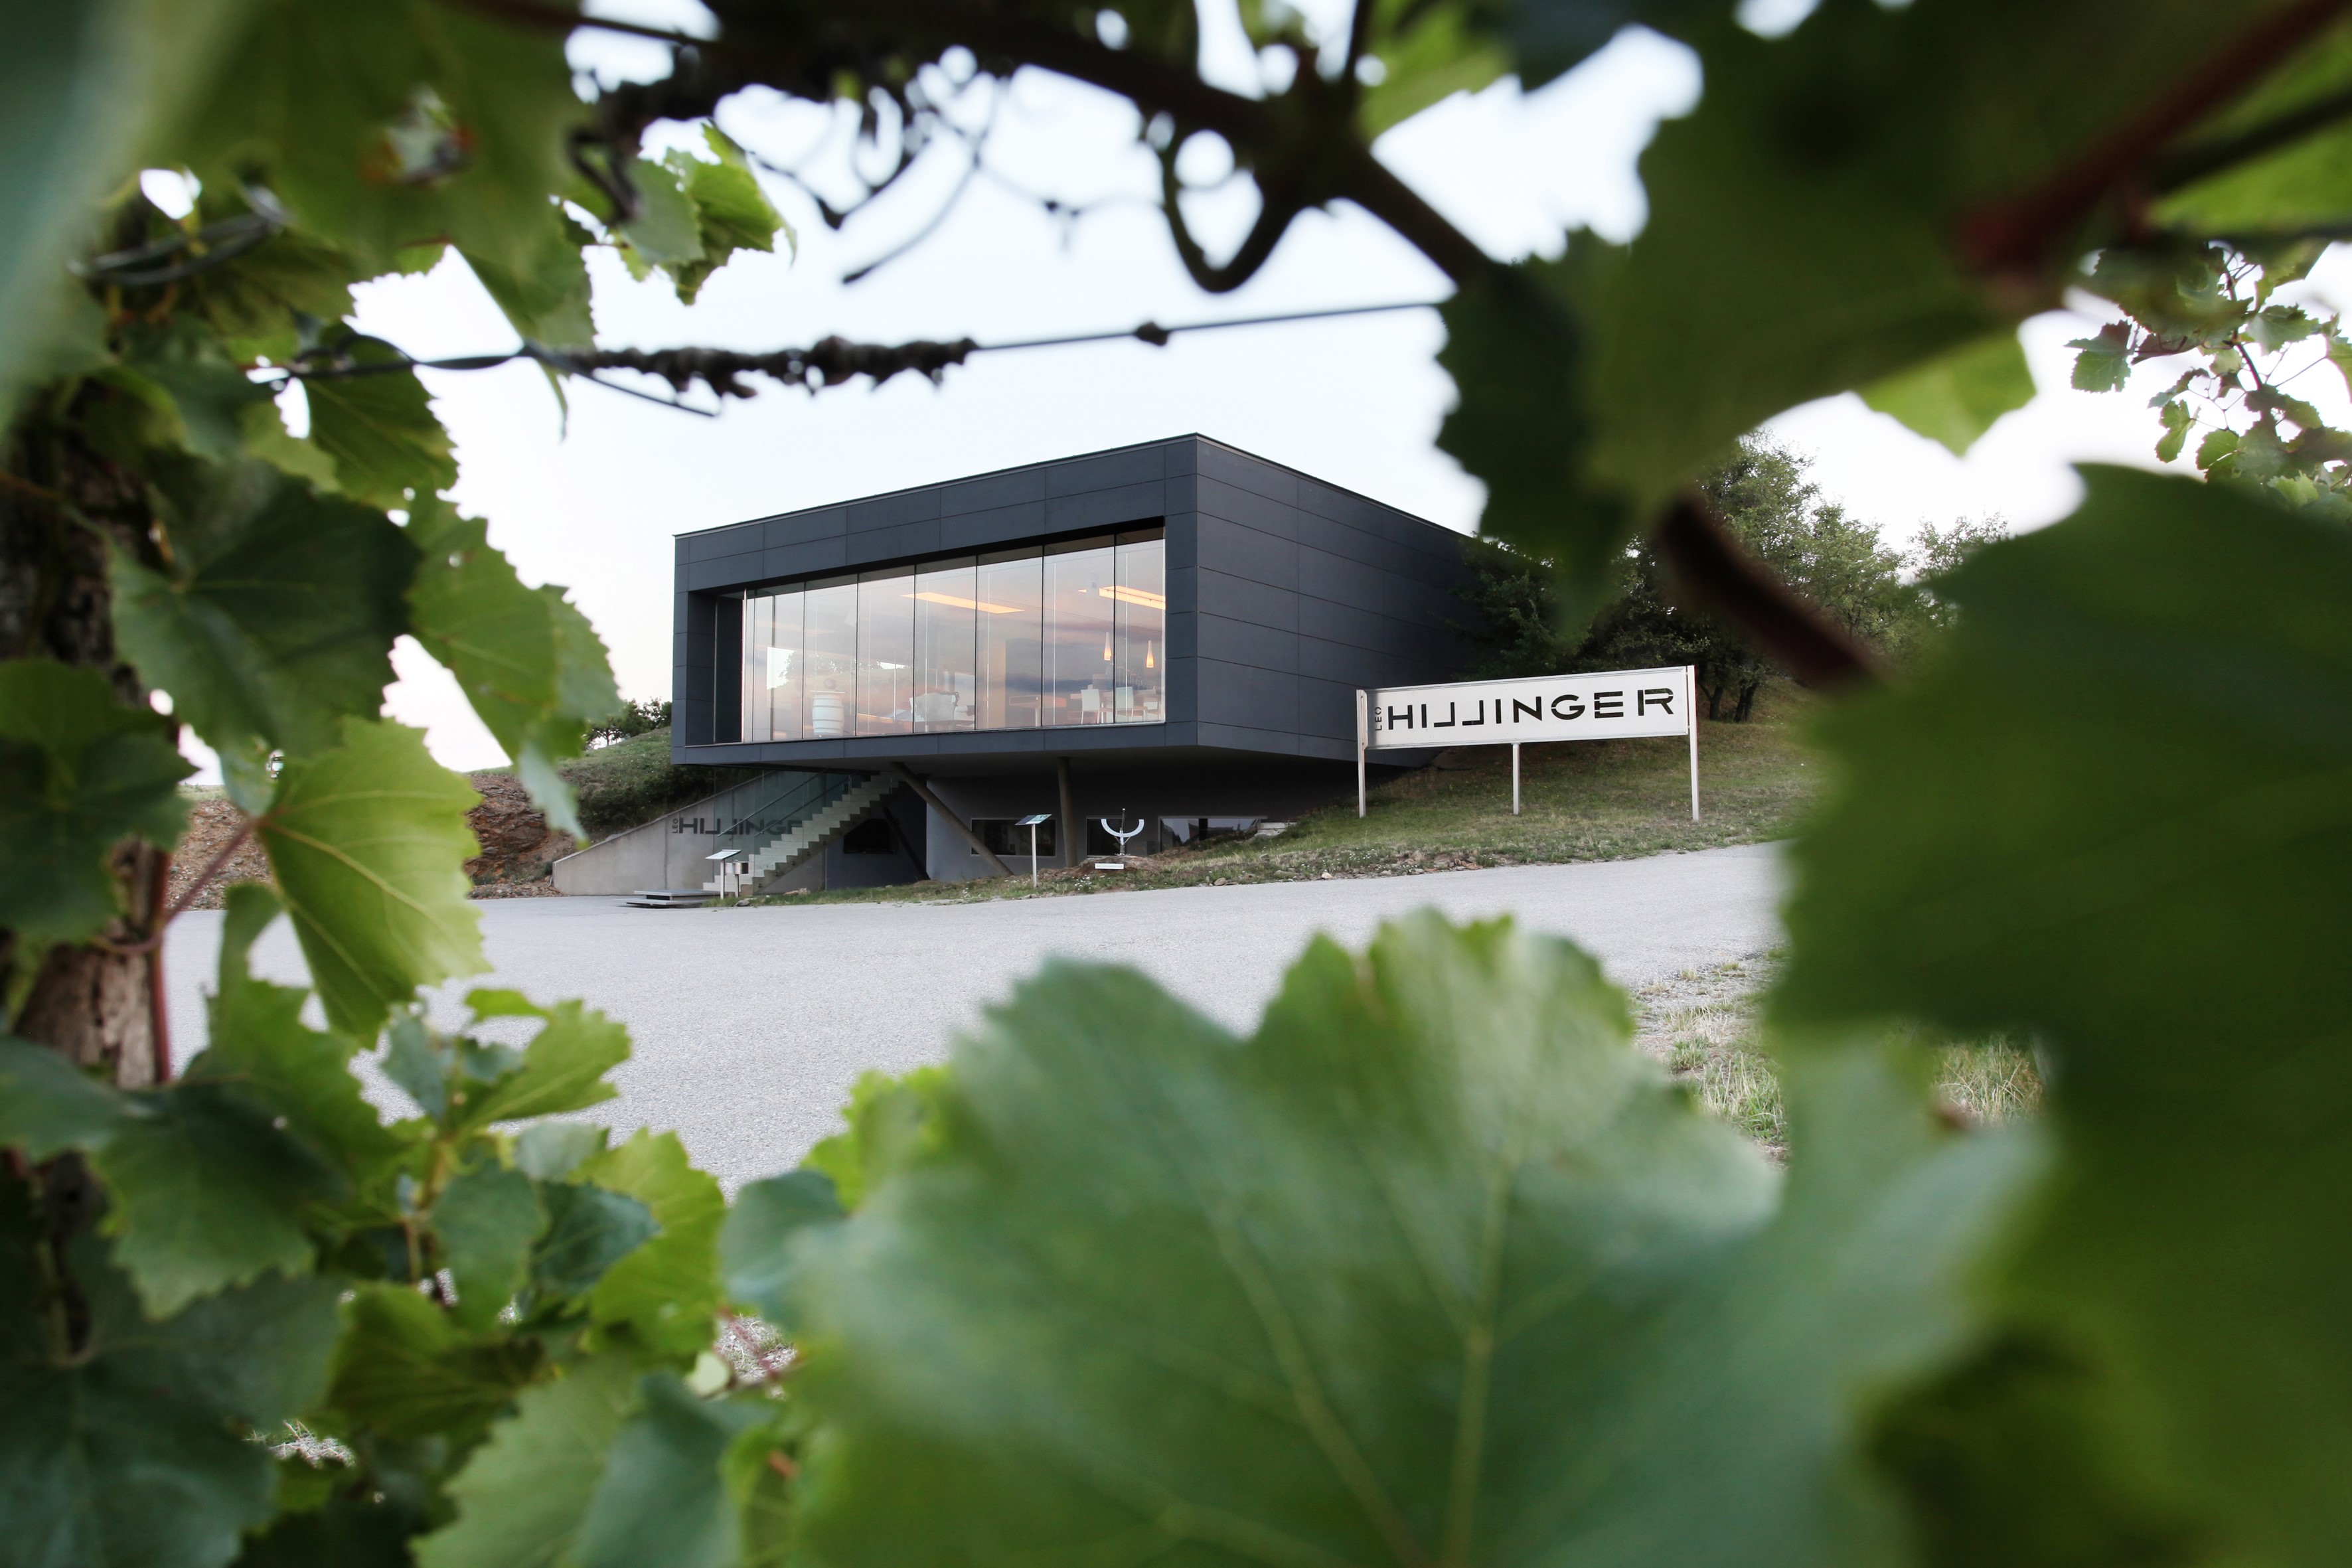 Leo Hillinger GmbH in Austria, Europe | Wineries - Rated 0.9